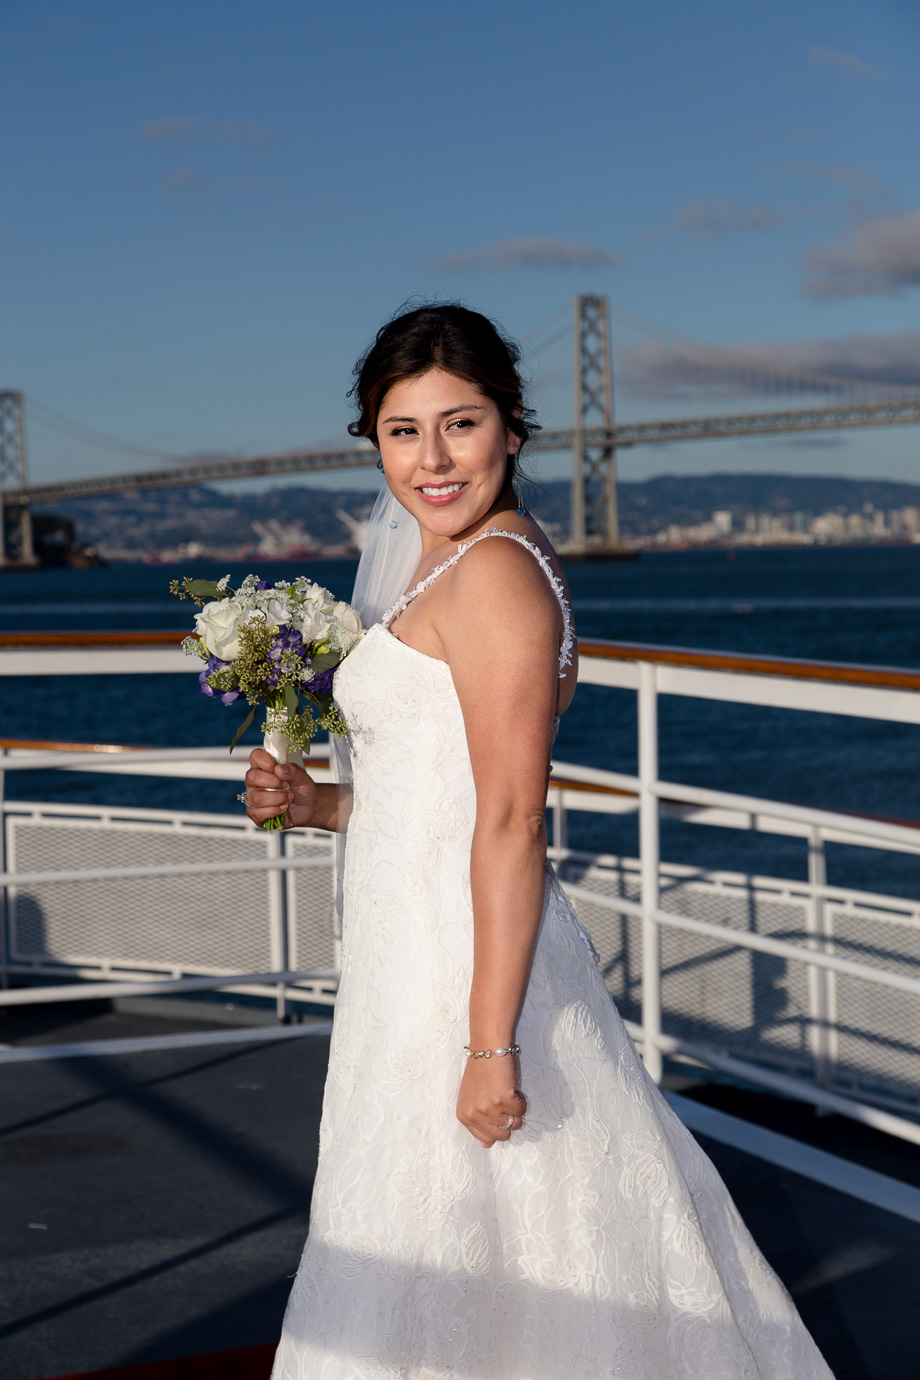 Portrait of the bride and her bouquet with the Bay Bridge in the background